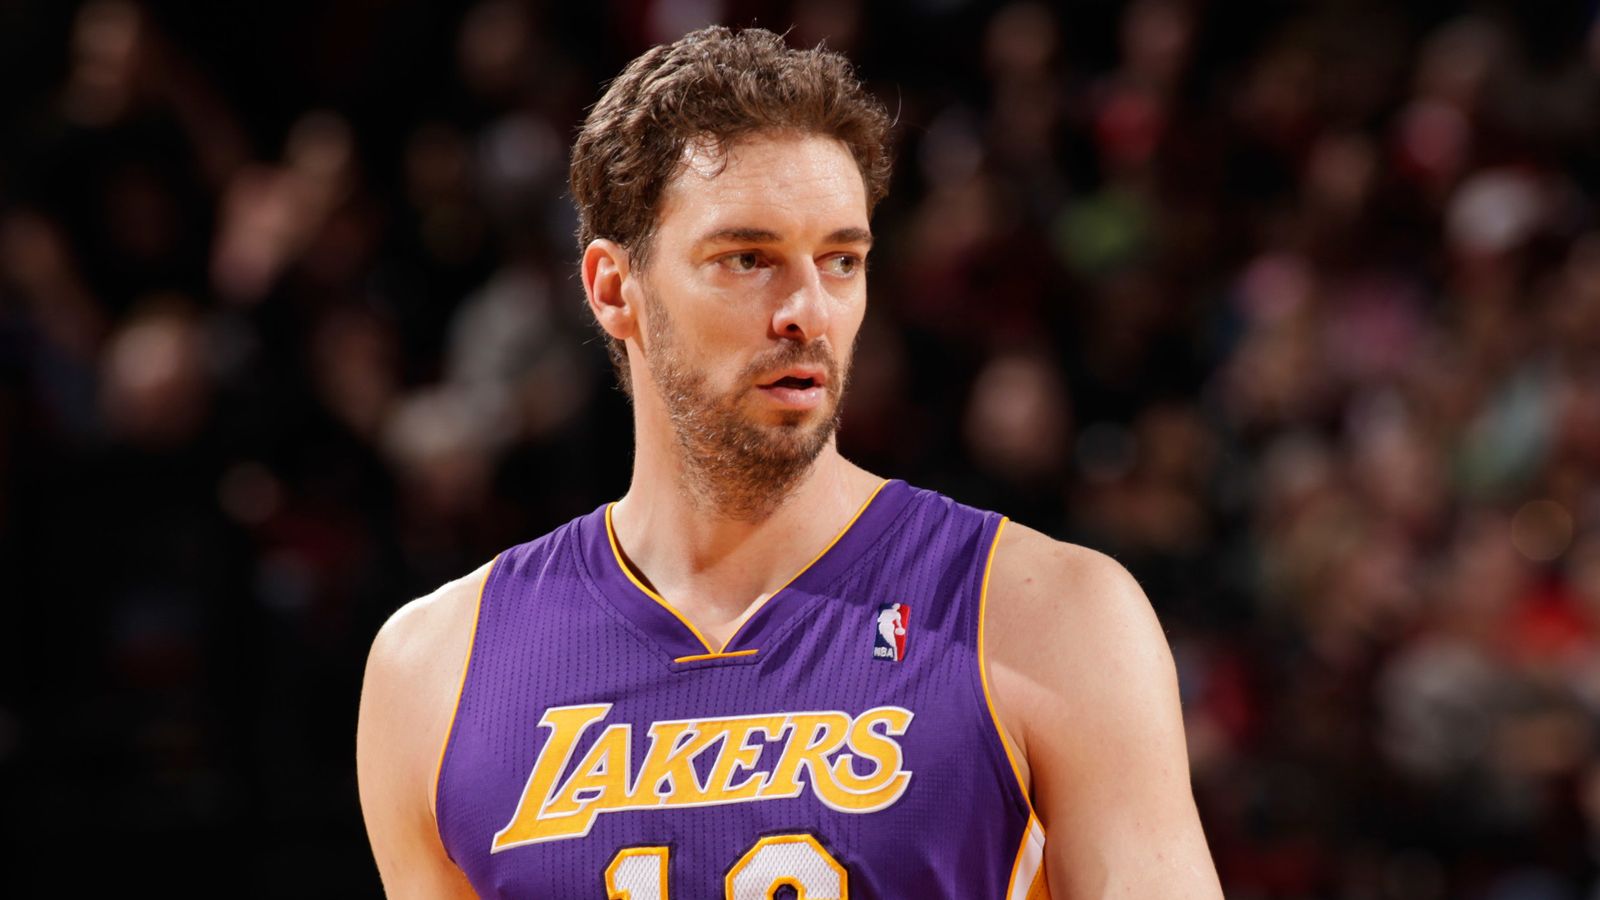 Lakers' Gasol expects to return for game against Heat - Sports Illustrated